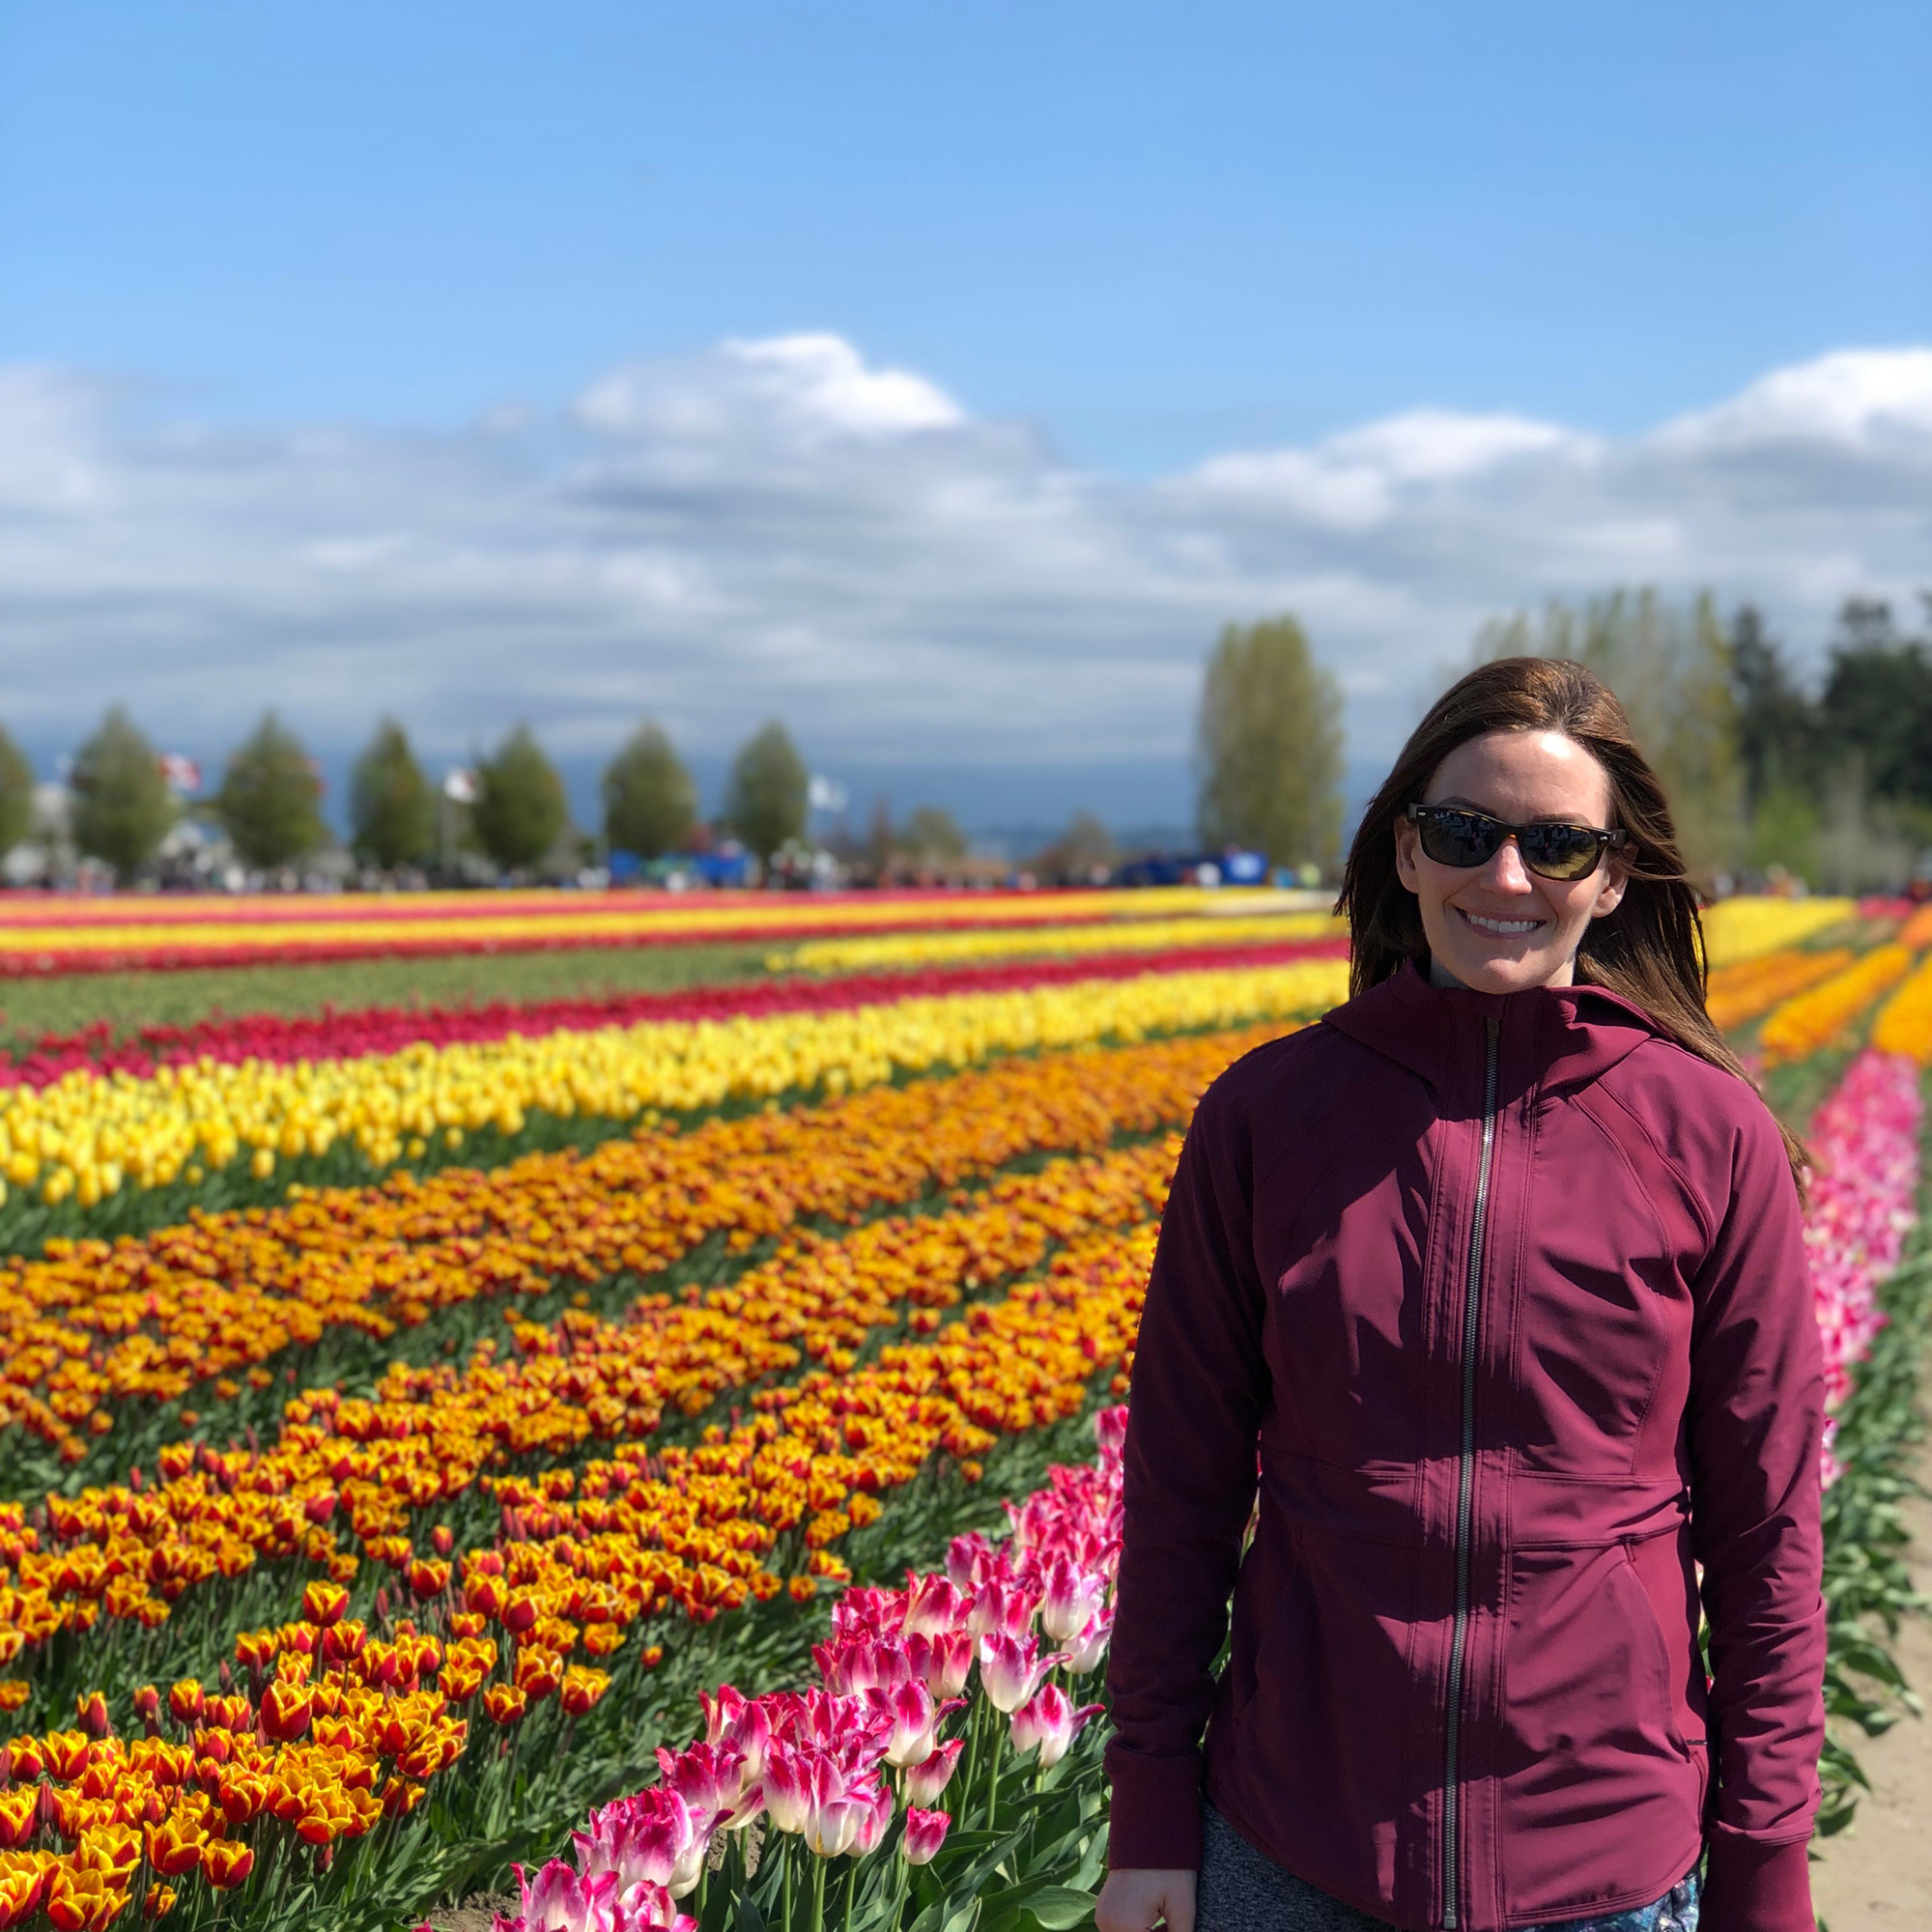 Sarah smiles will standing in a field of colourful tulips